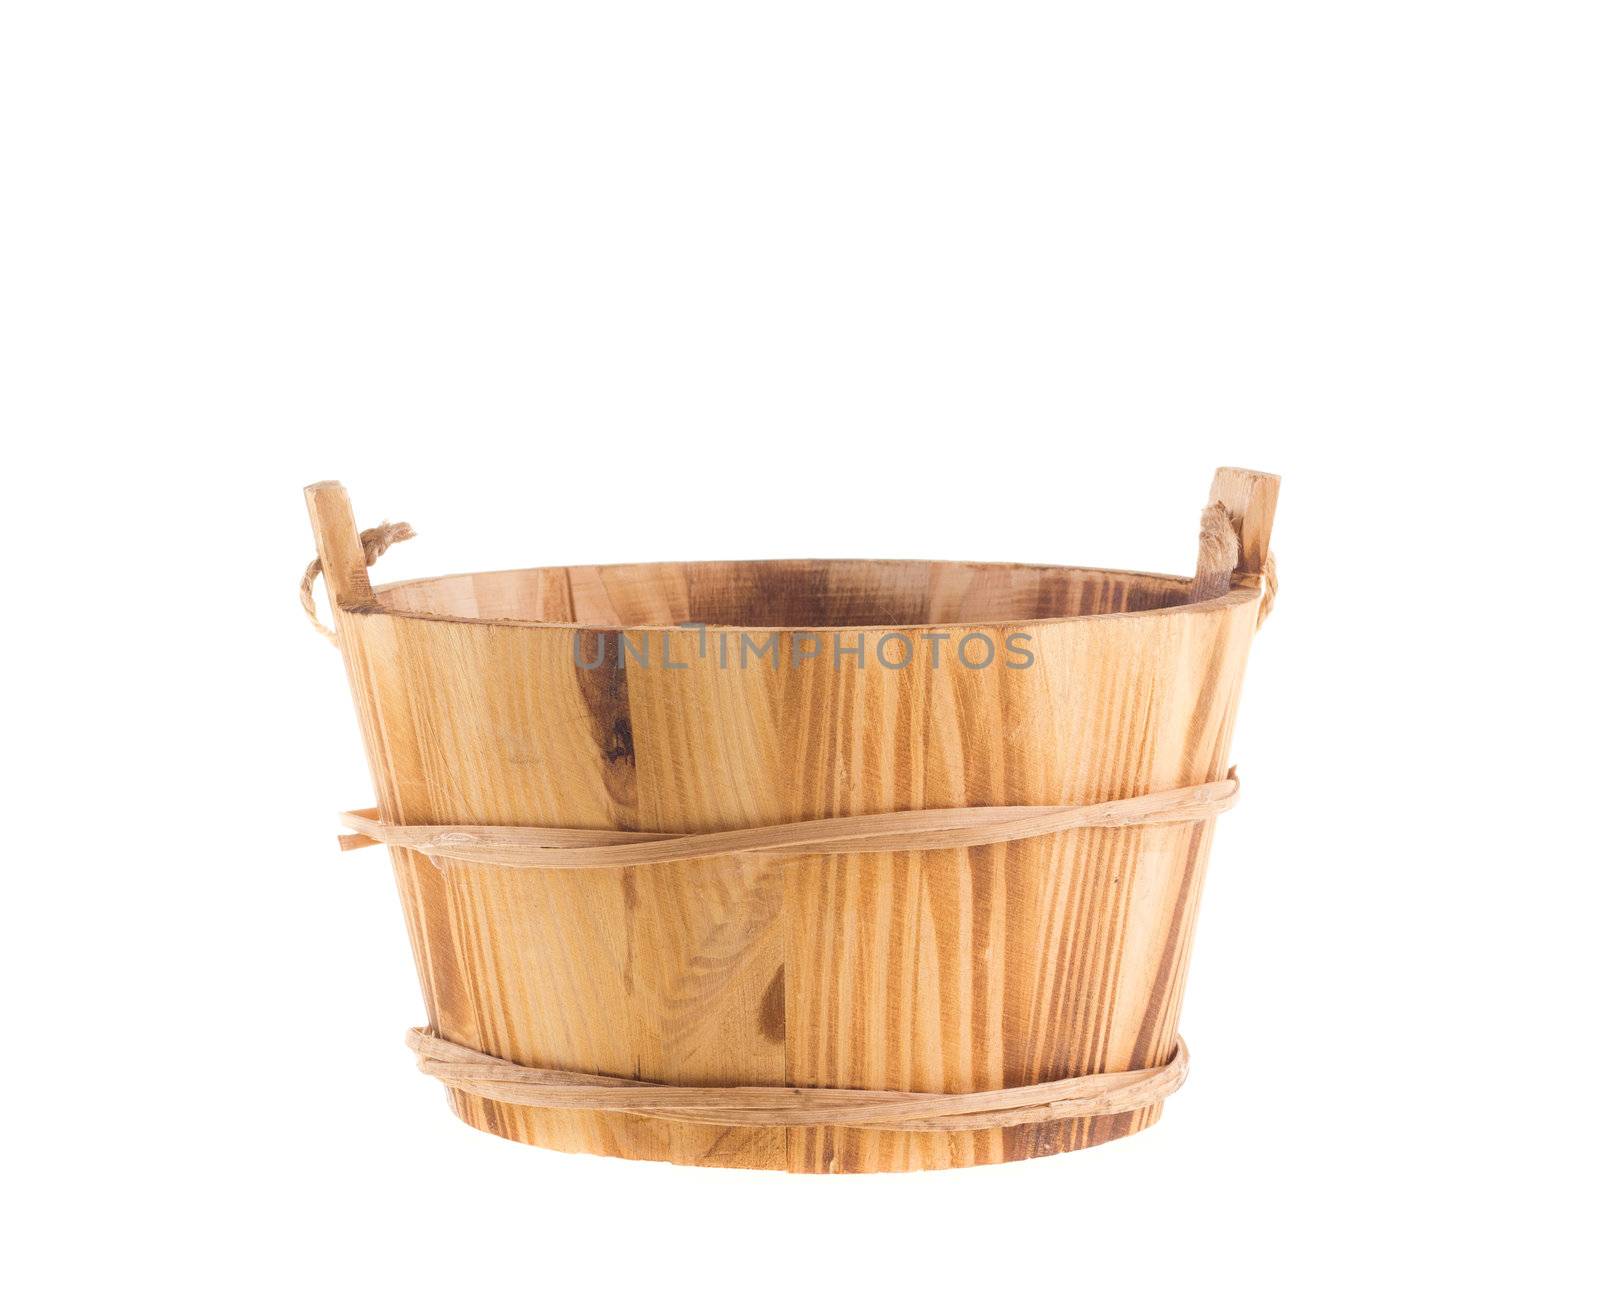 empty wooden bucket by tehcheesiong